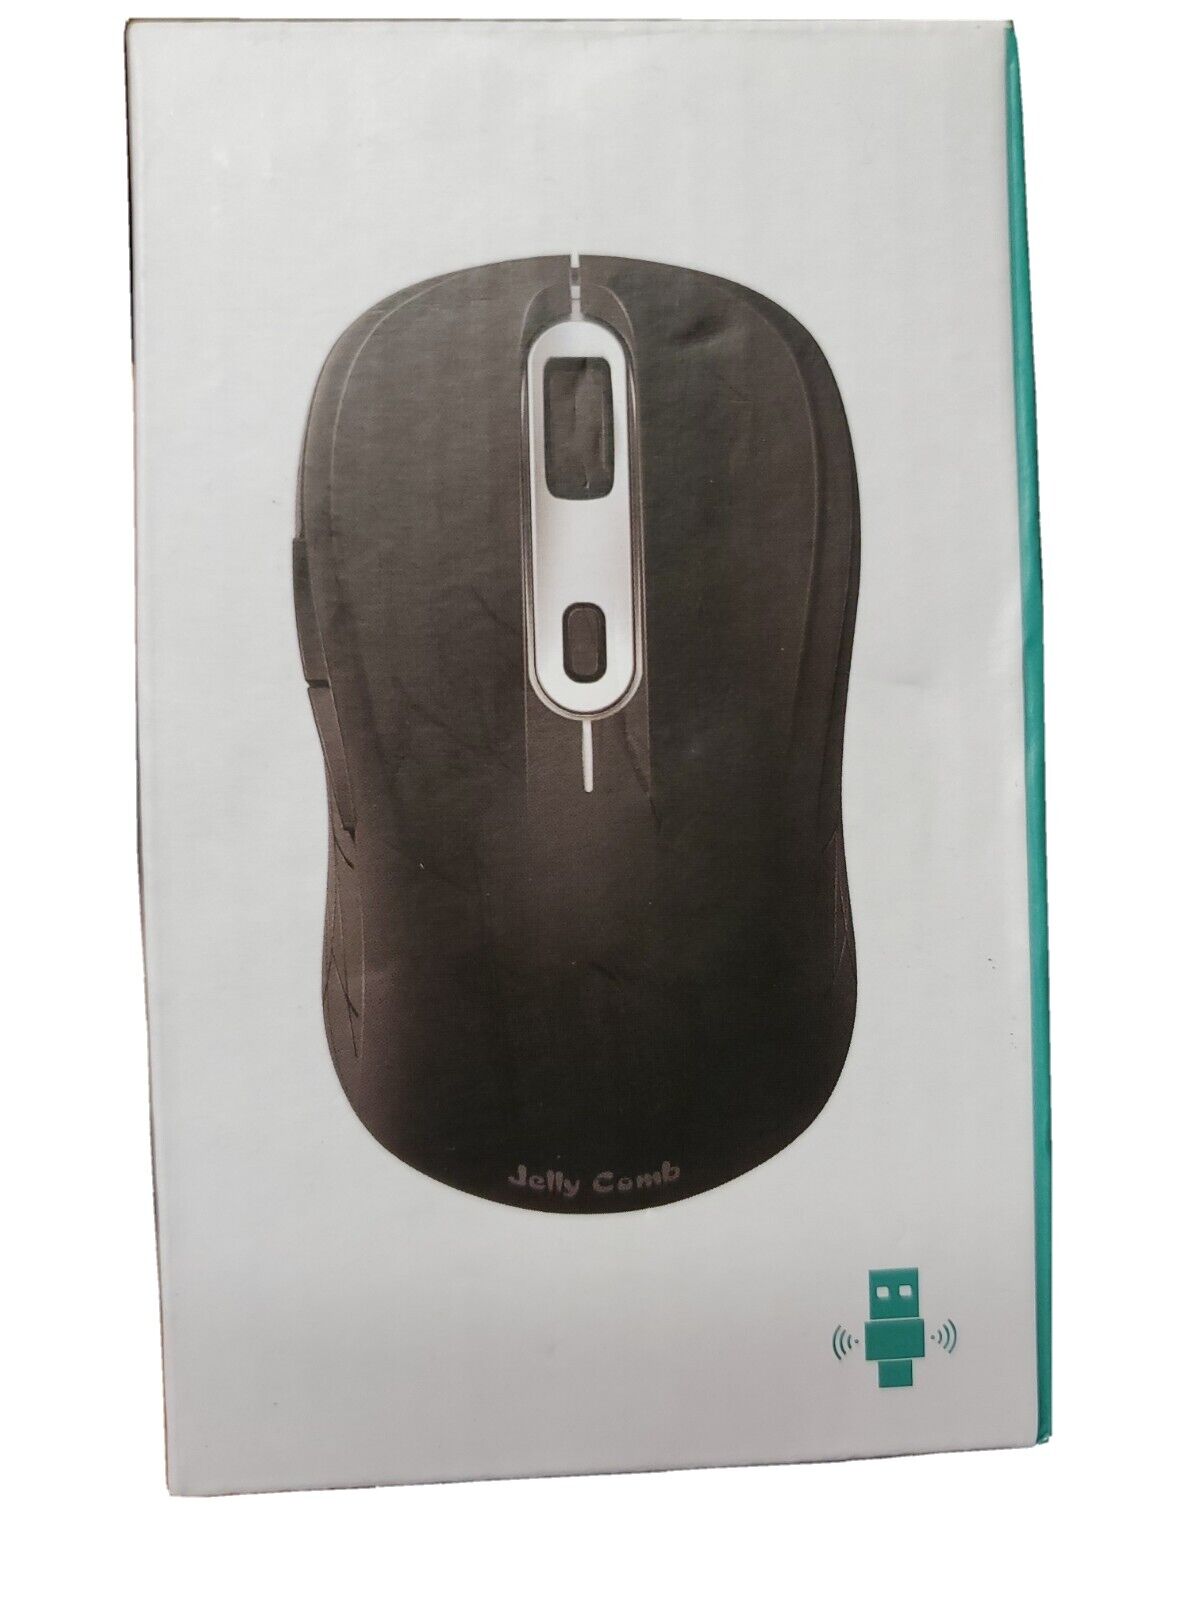 Jelly Comb wireless mouse Ms048